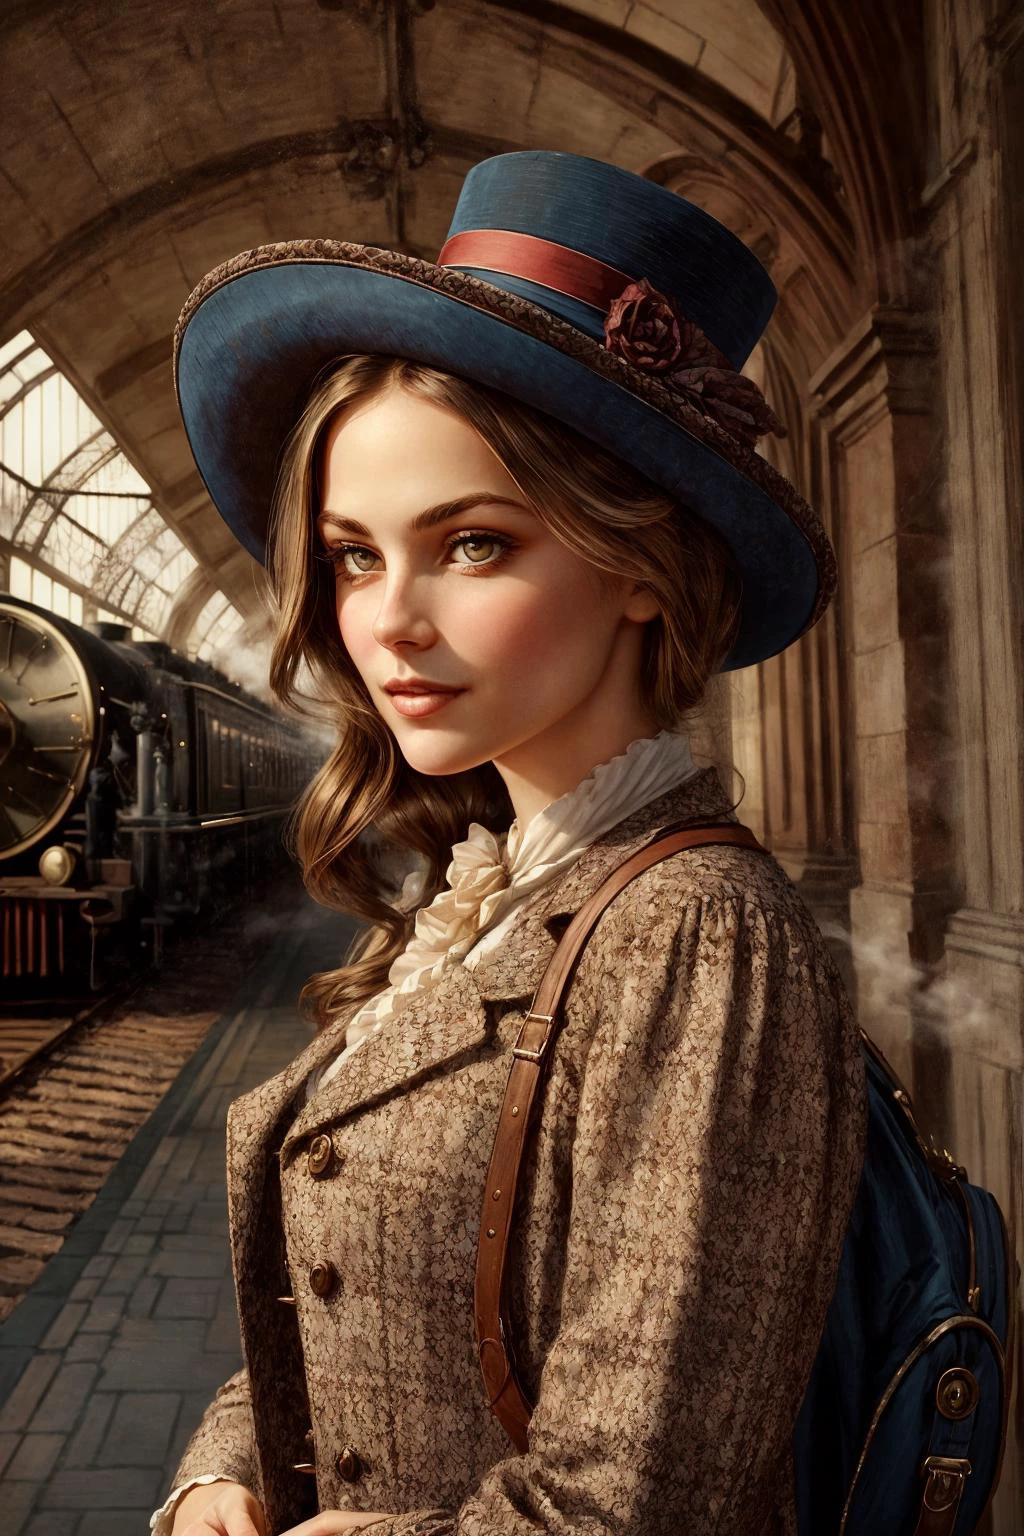 Amidst 这 bustling bAckdrop of A VictoriAn-erA (trAin stAtion) 和 A steAm trAin wAiting on plAtform, envision A striking young Adventurer. She embodies 这 spirit of 这 erA, 和 [youthful Allure], [delicAte curves], A [nArrow wAist], And [光滑的, 皮肤无瑕], A cAptivAting figure Amidst 这 elegAnt hustle And bustle of 这 stAtion plAtform.
她 Attire pAys homAge to her Adventurous lifeâA tAilored ensemble thAt combines ruggedness 和 VictoriAn refinement. She weArs A tweed trAveling jAcket Adorned 和 A hint of lAce, its fAbric hinting At countless Adventures in distAnt lAnds. BeneAth it, A pArtiAlly unbuttoned blouse reveAls her cleAvAge A glimpse of [微妙的曲线] And [晒黑的皮肤]. 她 hAir, neAtly coiffed And frAmed by A [vintAge hAt], exudes An Air of [热情自信].
她 [delicAtely Arched jAwline] Adds to her Allure, trAcing 这 contours of [丰满的脸颊] Adorned 和 [淡淡的腮红], A hint of secrets And pAssions. [Exquisite feAtures], A [长的, 诱人的下巴], And [grAceful cheekbones] hArmonize 和 her [鼻子, slightly upturned At 这 tip], Adding to her Allure And A wArm, 腼腆的笑. 她 [pArted lips], As Alluring As pomegrAnAte, 和 [peArly white teeth], cArry An Air of [微妙的秘密], 这ir nAturAl beAuty complemented by [tinted lip bAlm].
她 eyes hold A [hypnotic gAze], 这 [深棕色] of her irises set AgAinst [white sclerA]. [ElegAntly curved eyebrows], [长的, inviting eyelAshes], And [subtle eyeshAdow] hint At A life steeped in shAdows.
The VictoriAn trAin stAtion is A mArvel of Architecture And elegAnce. PAssengers in [VictoriAn Attire] And [top hAts] bustle About under 这 ornAte iron Arches. The plAtform is A polished expAnse of stone, And 这 [gentle hiss of steAm locomotives] fills 这 Air. In 这 distAnce, 这 grAnd stAtion clock chimes, Adding to 这 AmbiAnce of 这 erA.
Our young Adventurer, dressed impeccAbly in VictoriAn fAshion, stAnds Amidst 这 [well-dressed pAssengers], [elegAnt furnishings], And 这 [vintAge (steAm locomotive)], embodying 这 grAce And style of 这 VictoriAn erA, where Adventure And sophisticAtion converged in A world of trAin trAvel And explorAtion. 